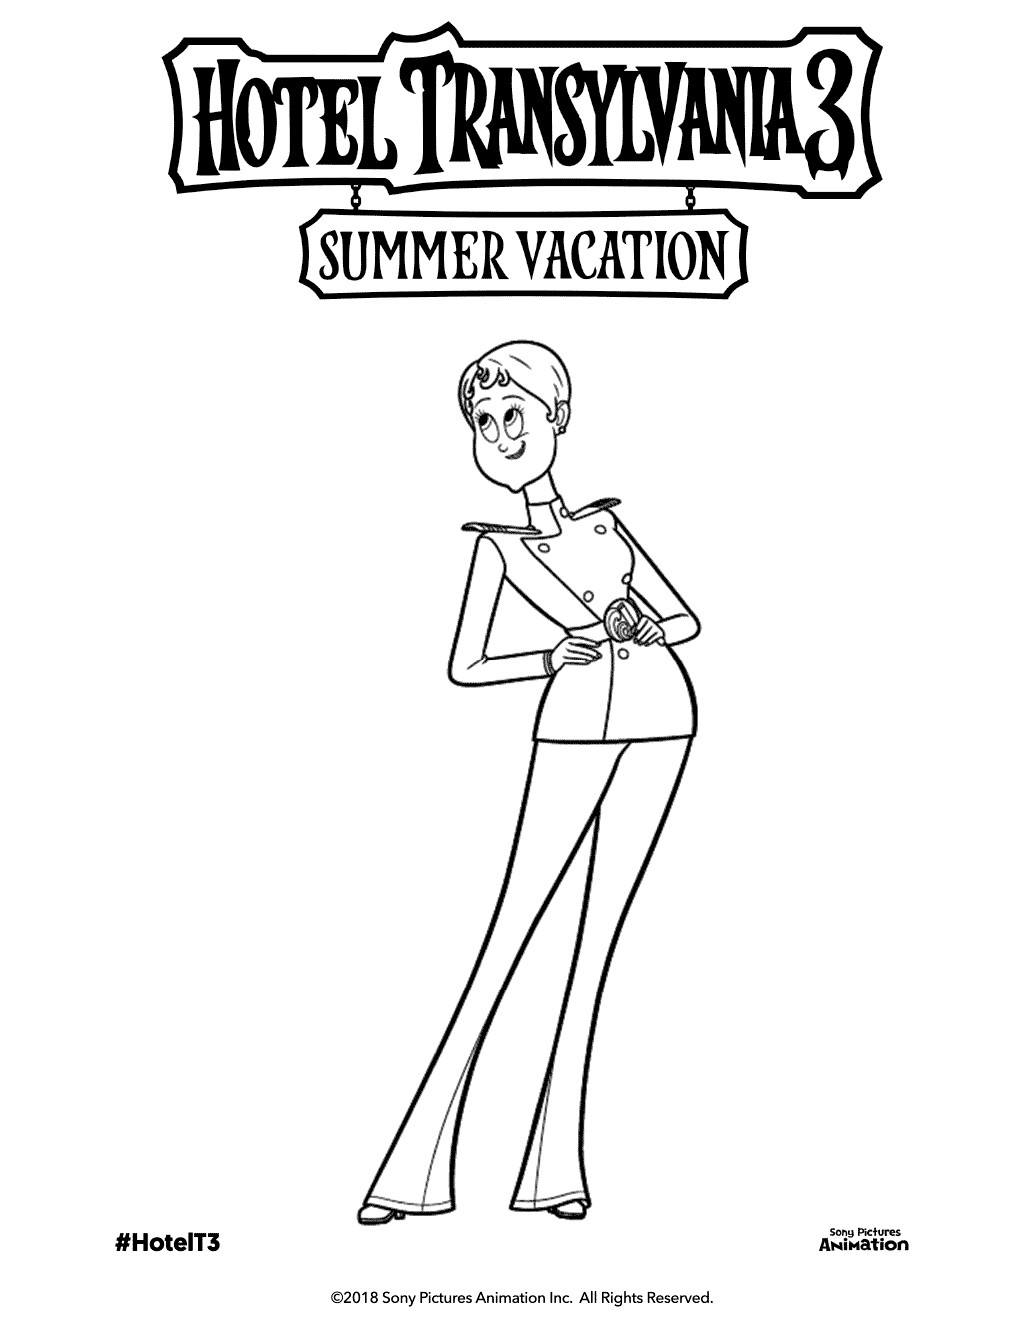 Hotel Transylvania 3 Coloring Pages
 Free Printable Hotel Transylvania 3 Coloring Pages